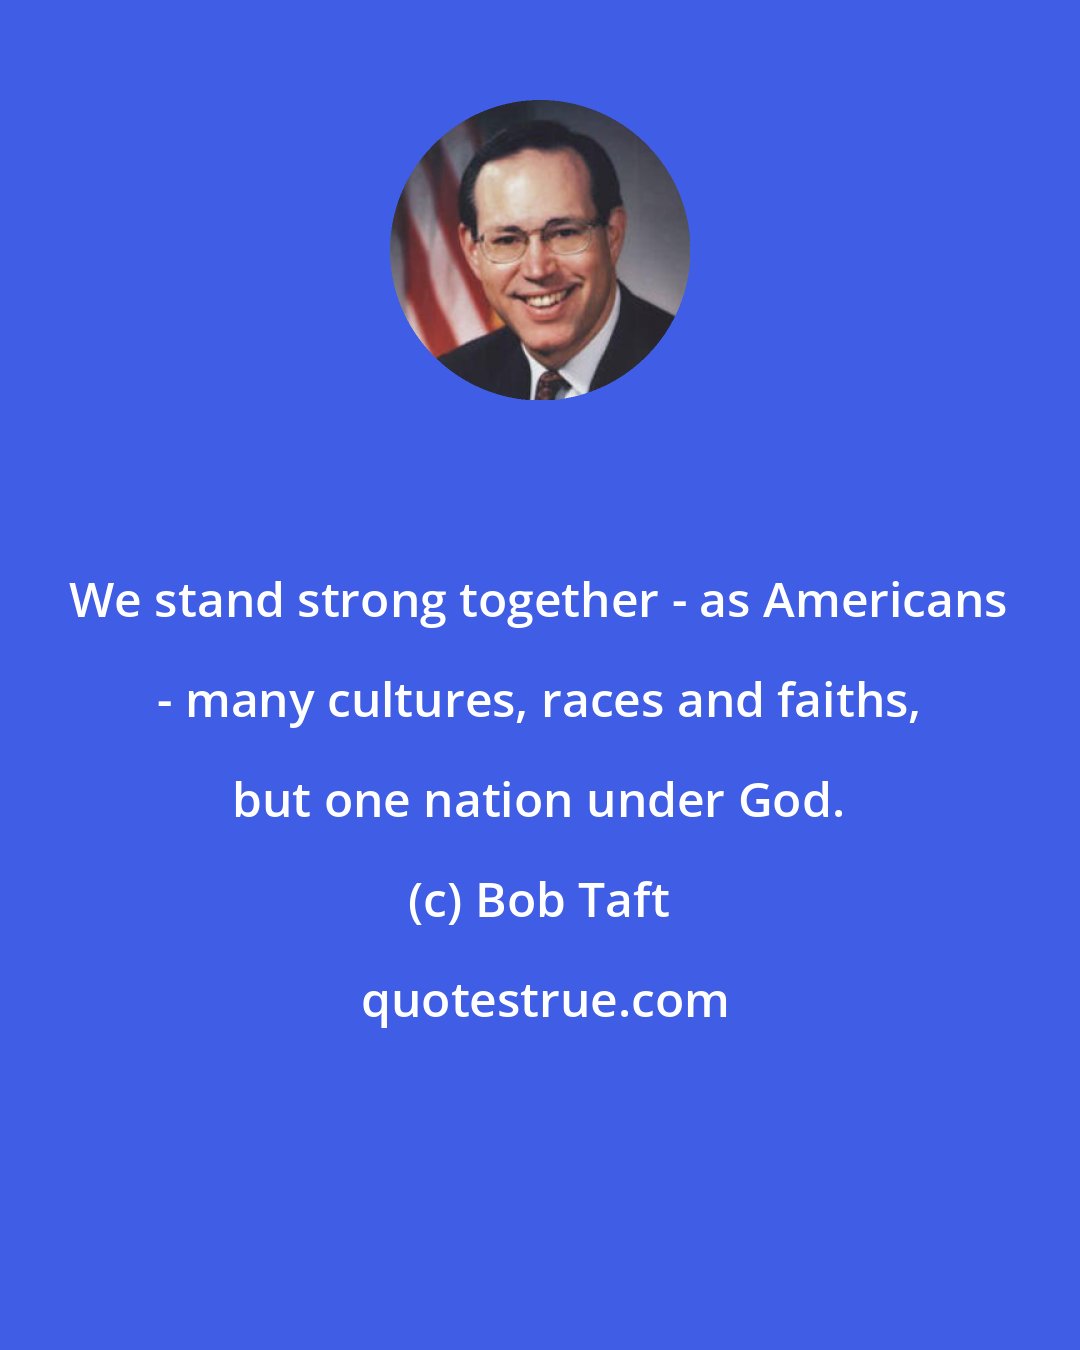 Bob Taft: We stand strong together - as Americans - many cultures, races and faiths, but one nation under God.